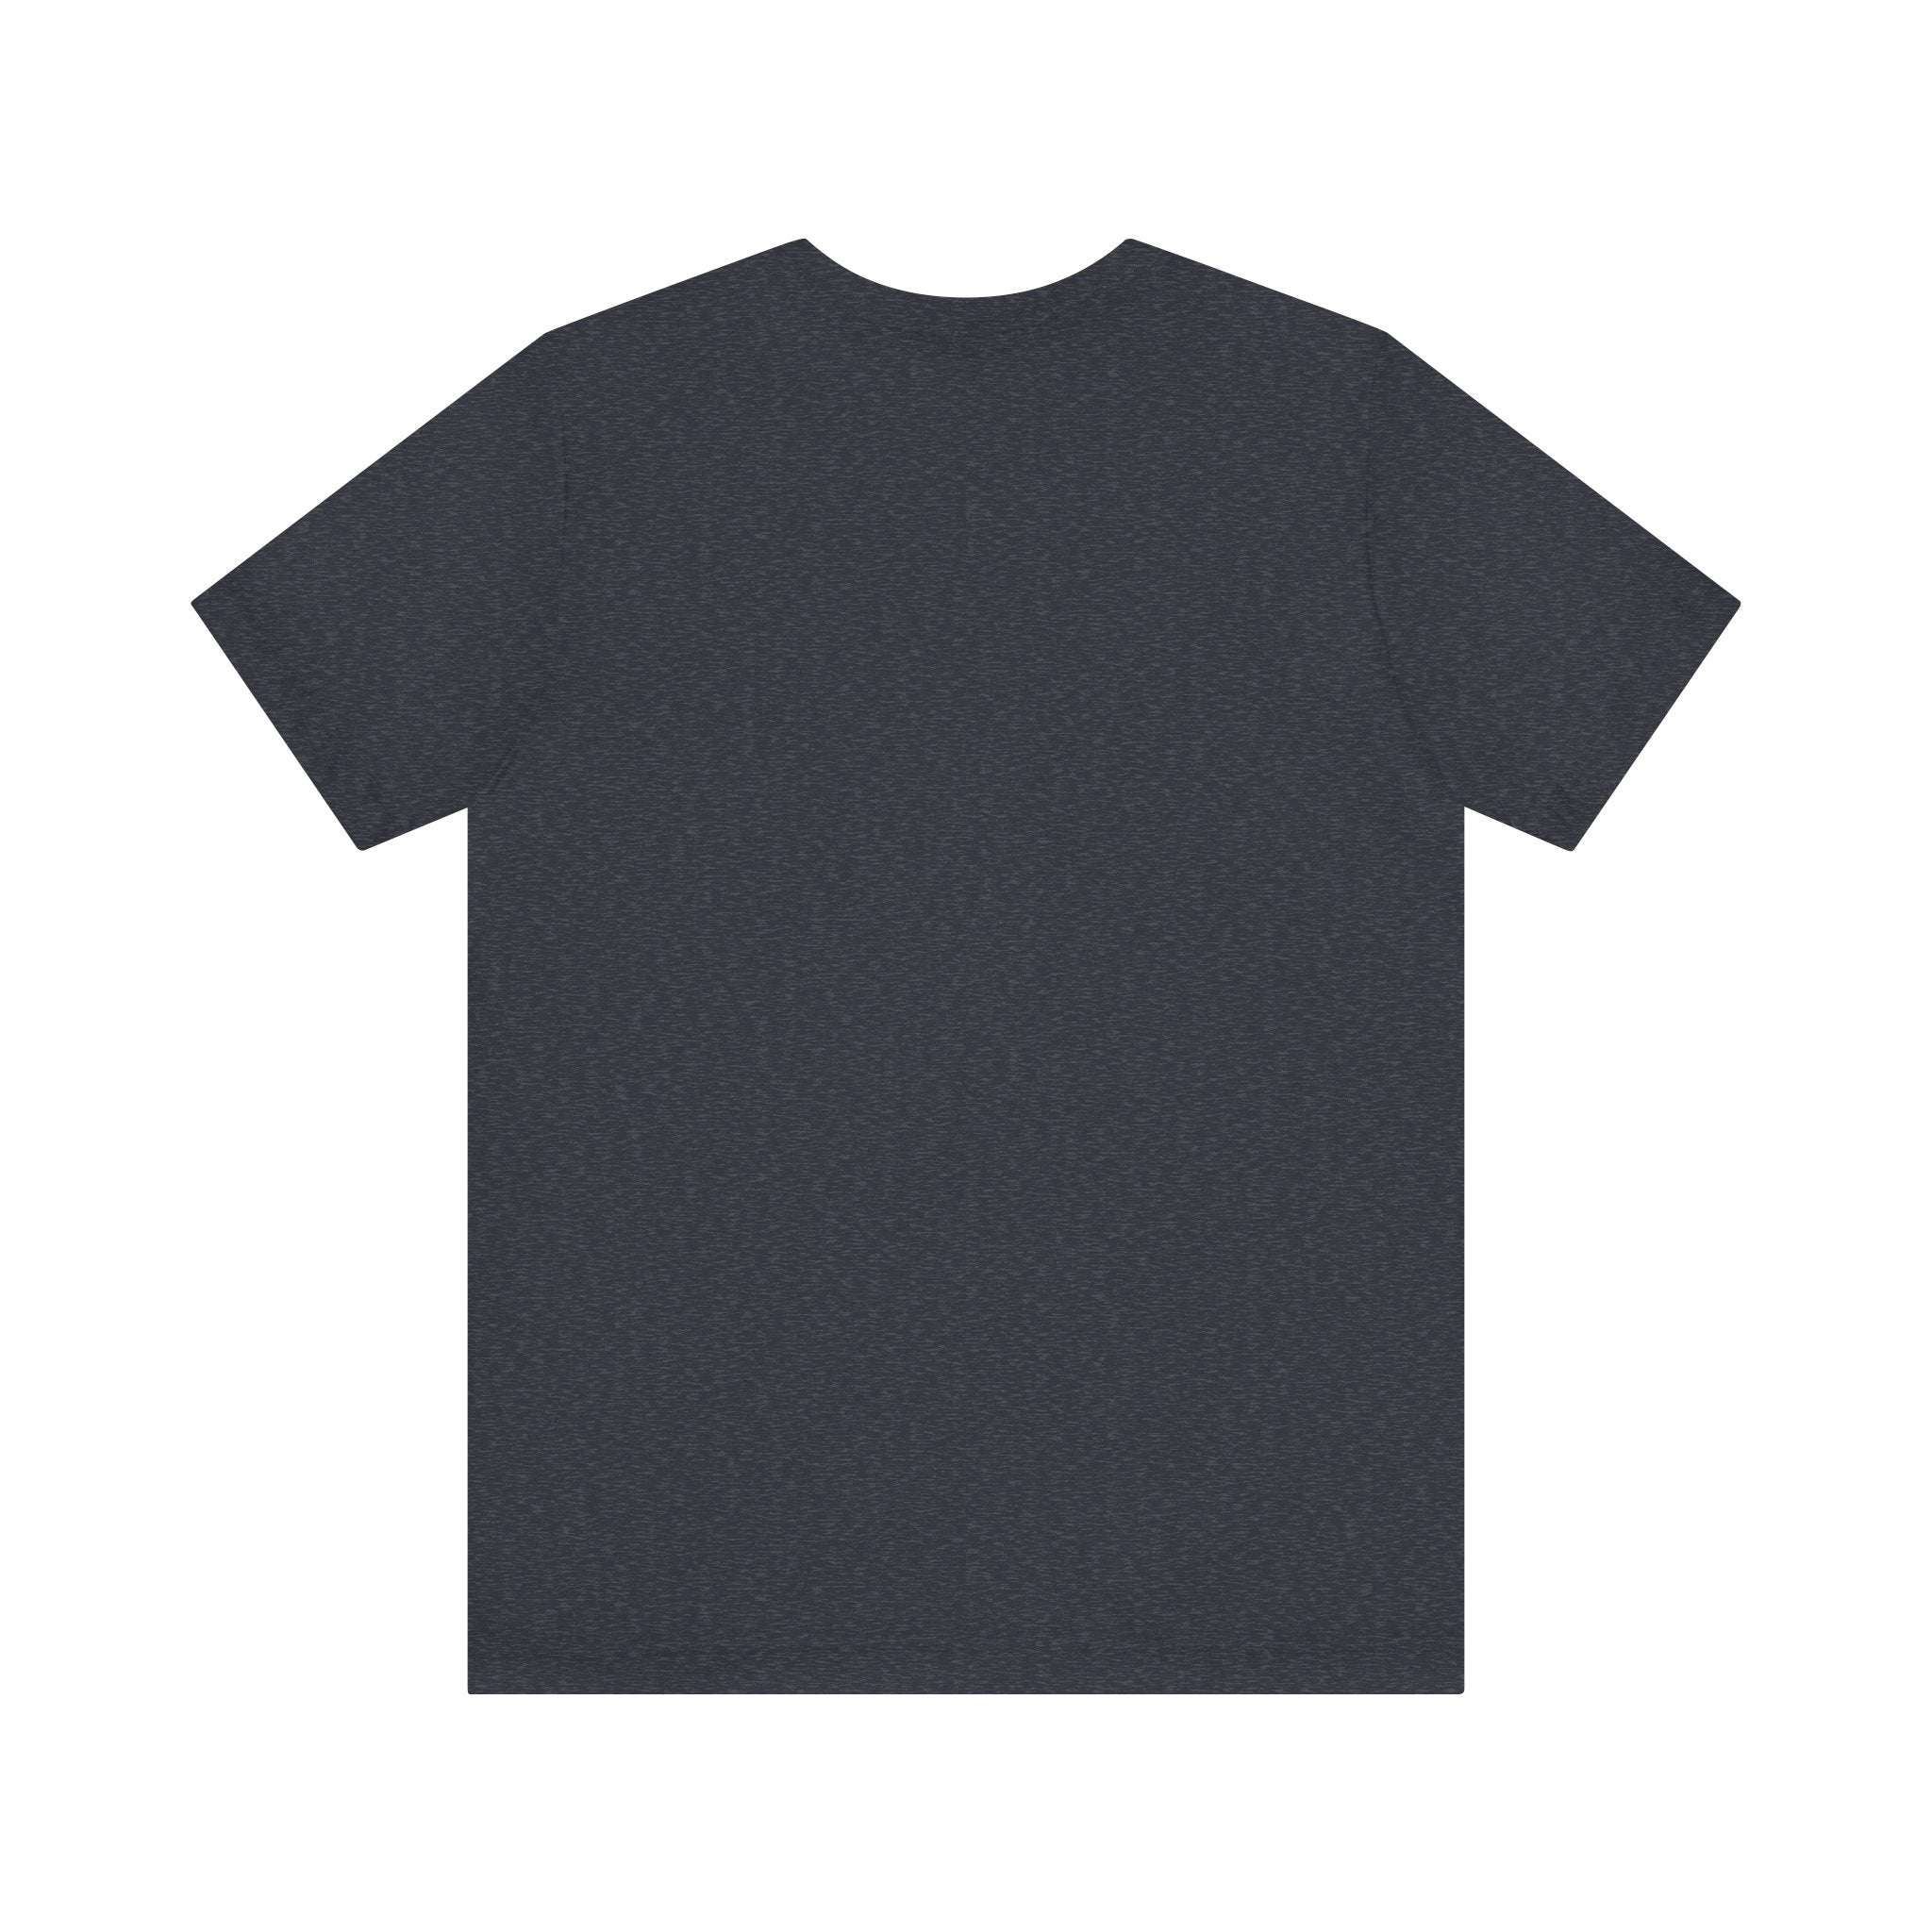 Direct-to-Garment Printed Black T-Shirt with Small Pattern on Front - Soulshinecreators Unisex Tee